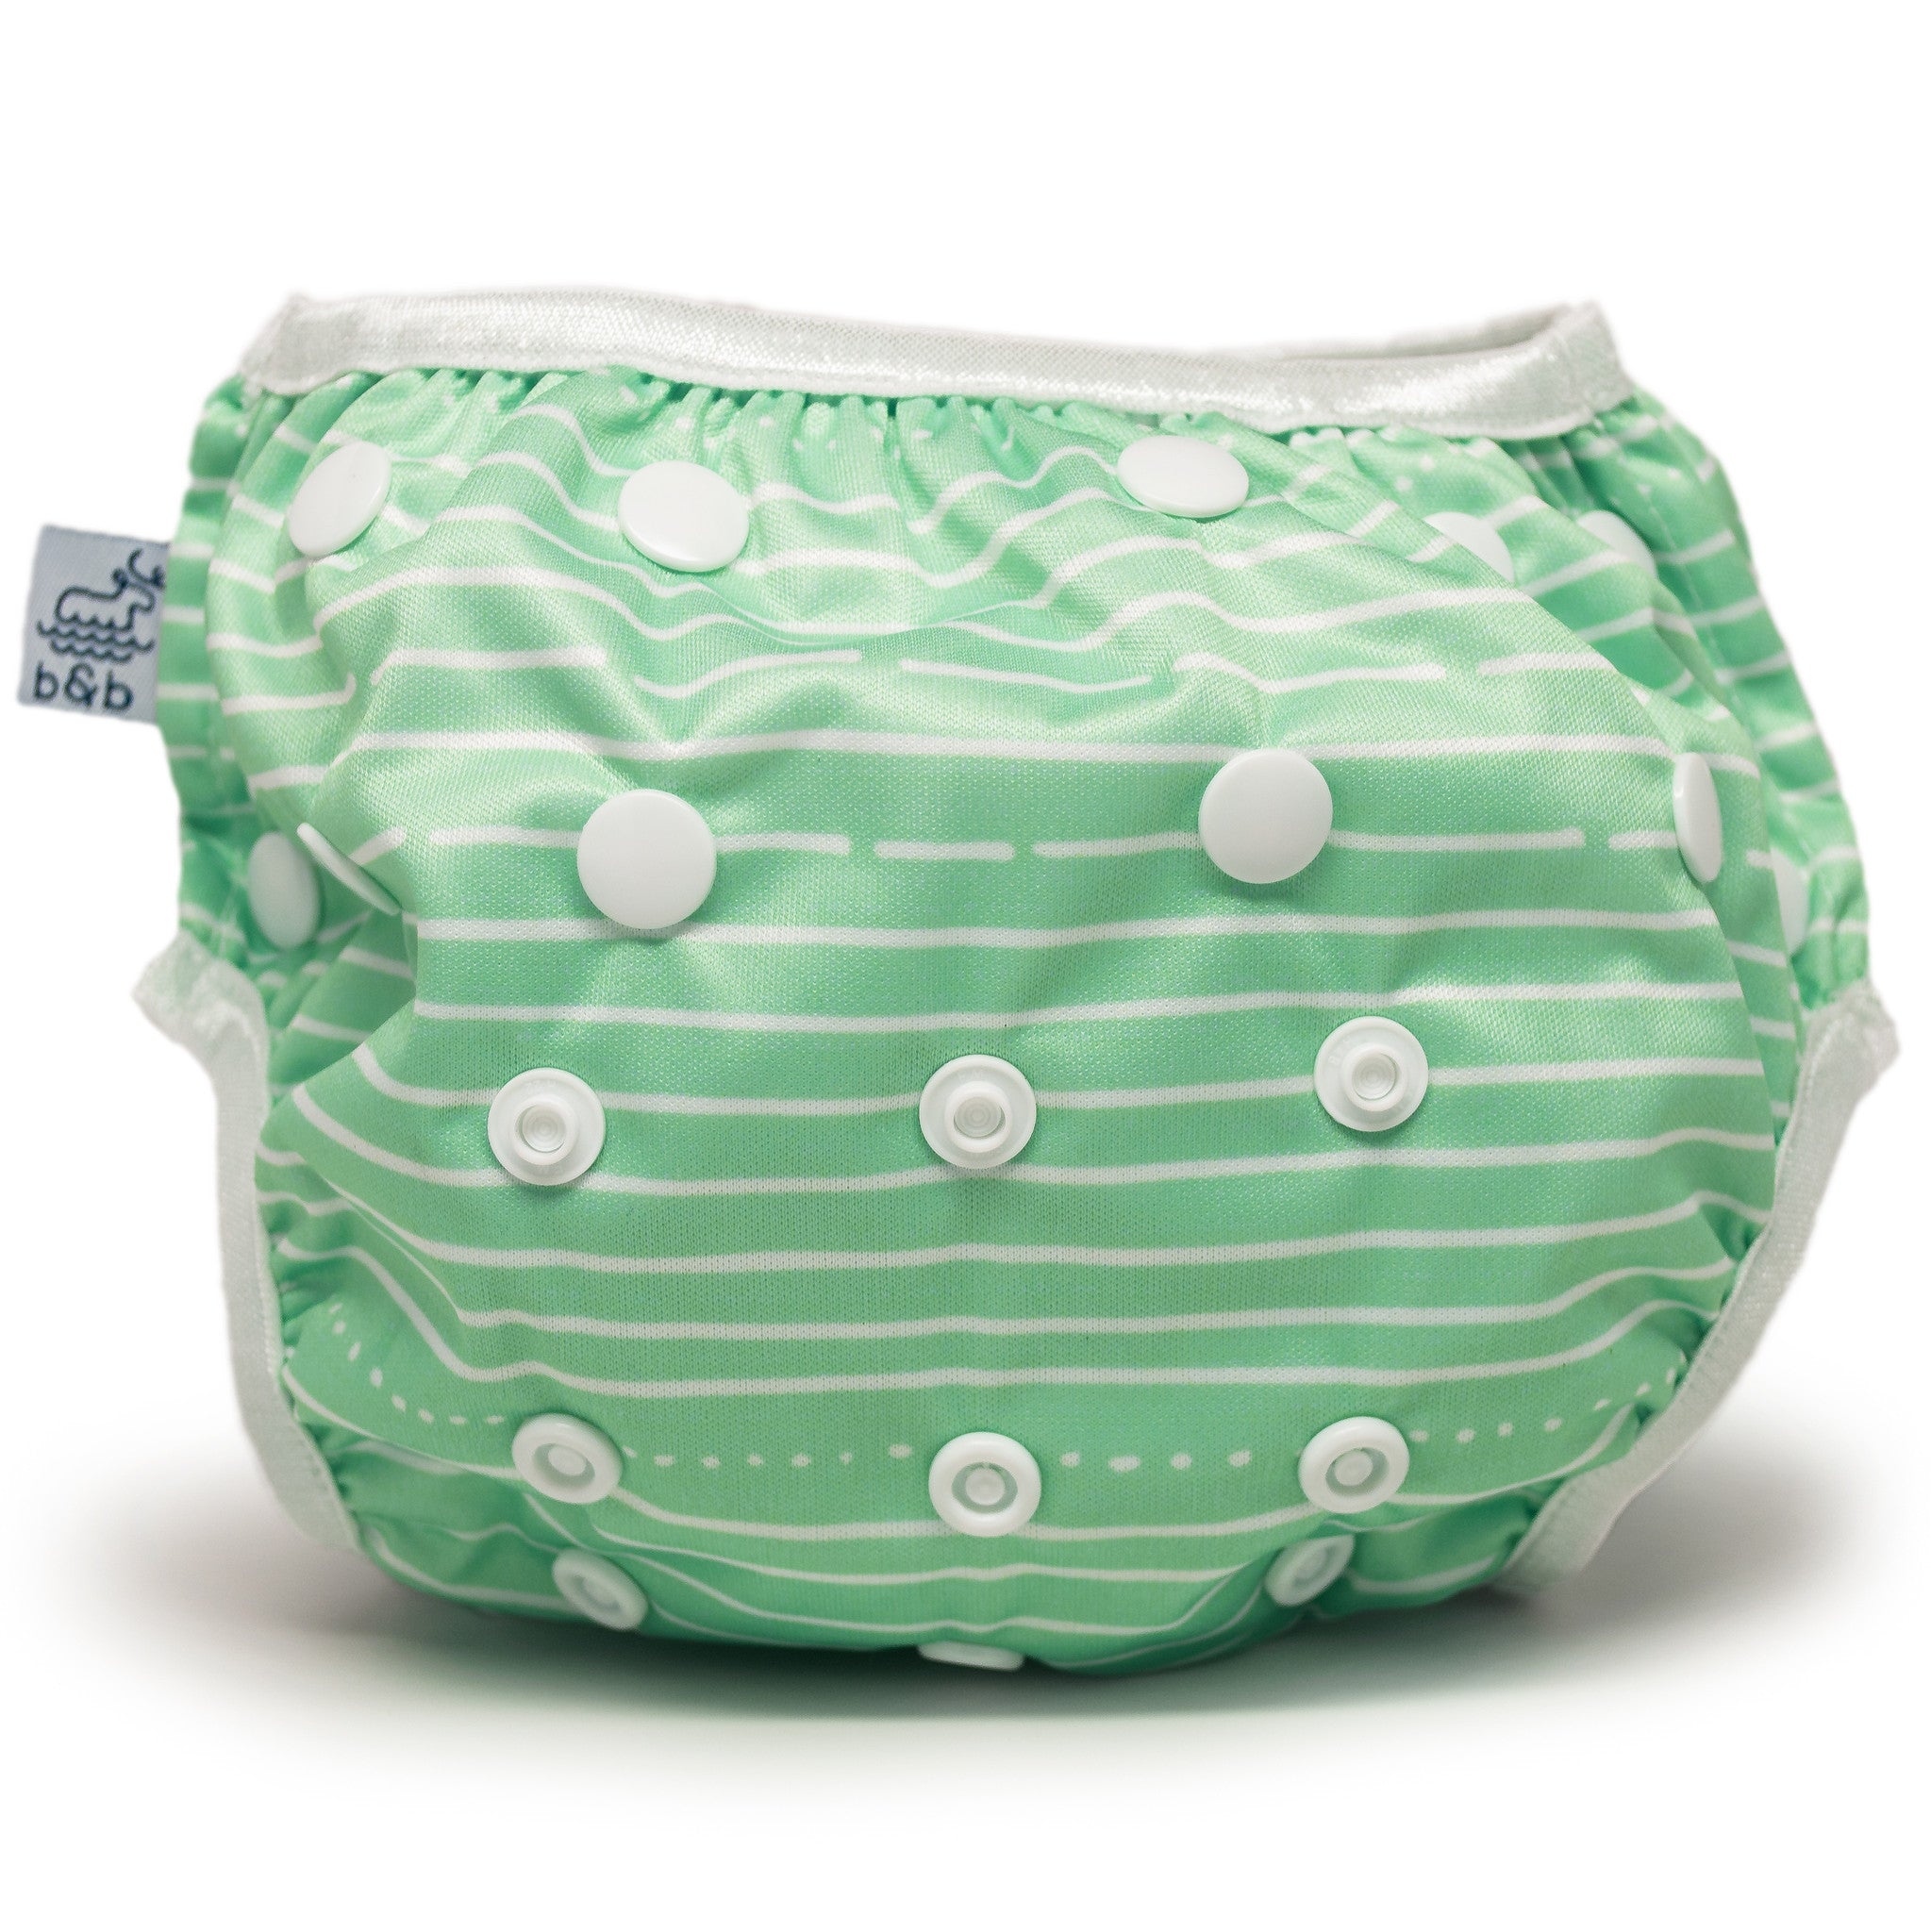 Beau and Belle Littles Swim Diaper, Regular Size, light green with white horizontal pin stripes, front view